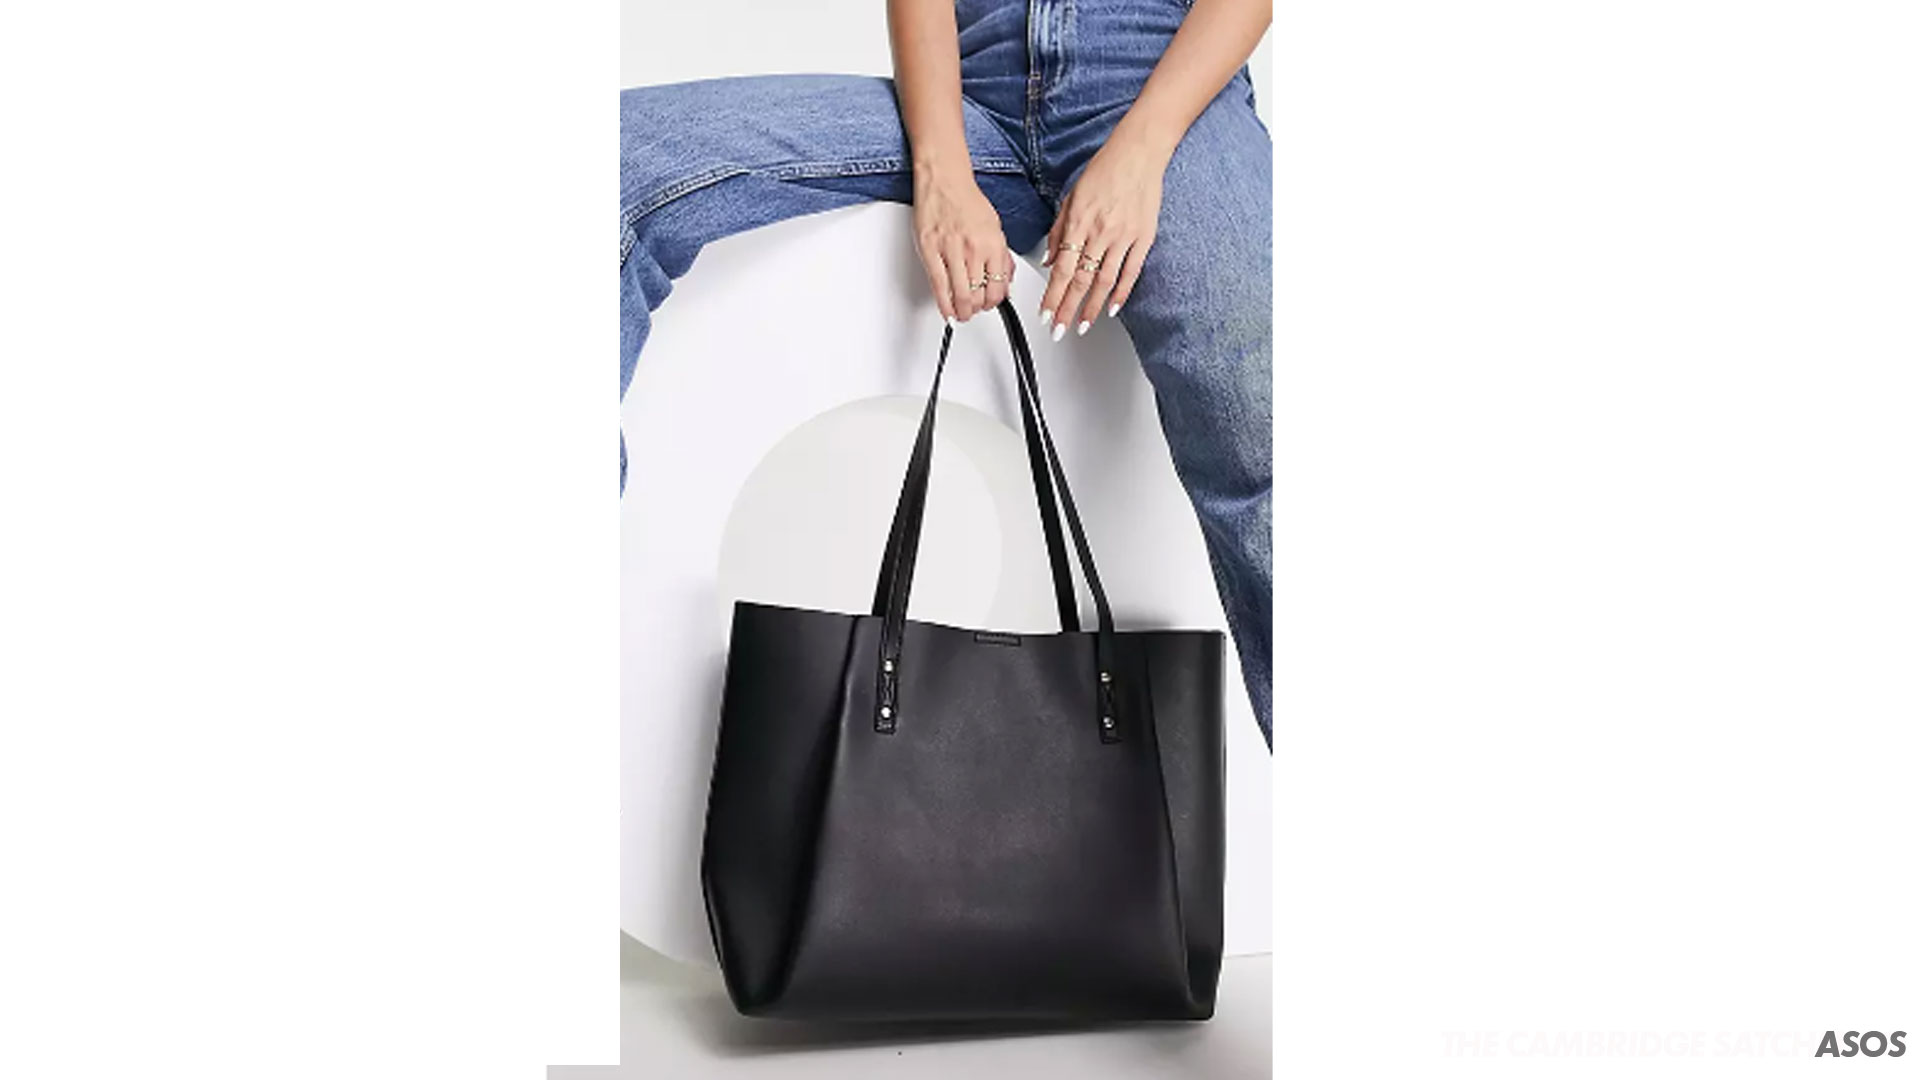 8 Tote Bags That Are Great For Fashion-Obsessed Uni Students - Society19 UK